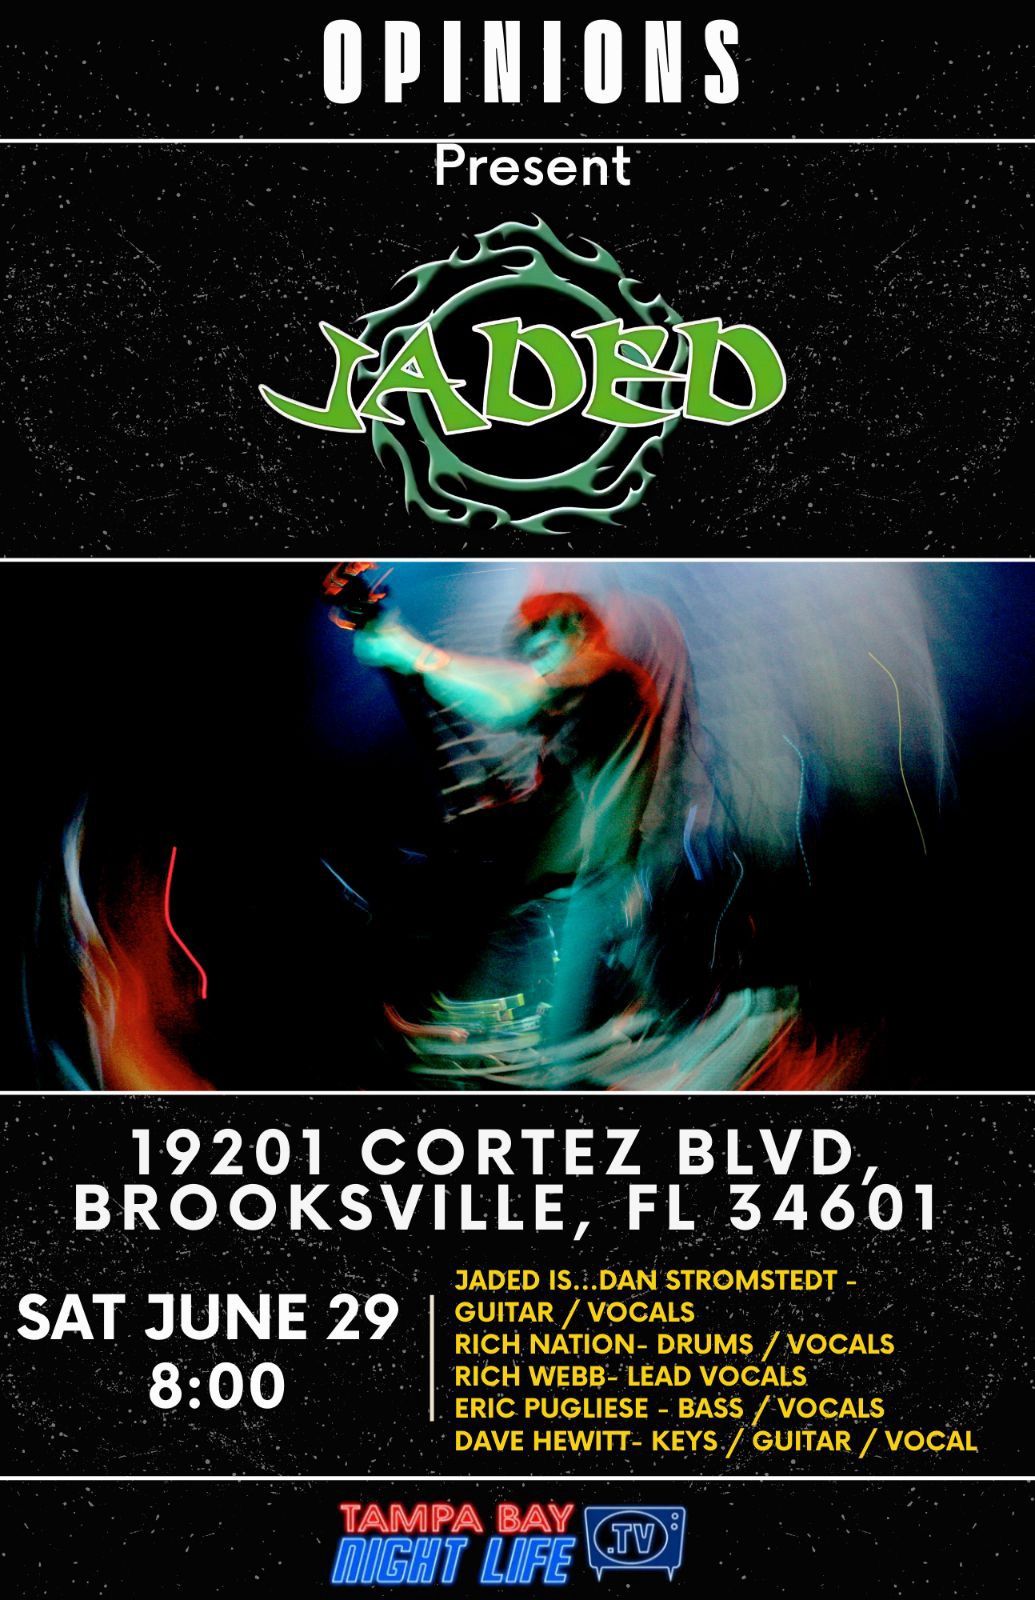 Jaded Live at Sangria, Beer, and Food Specials!